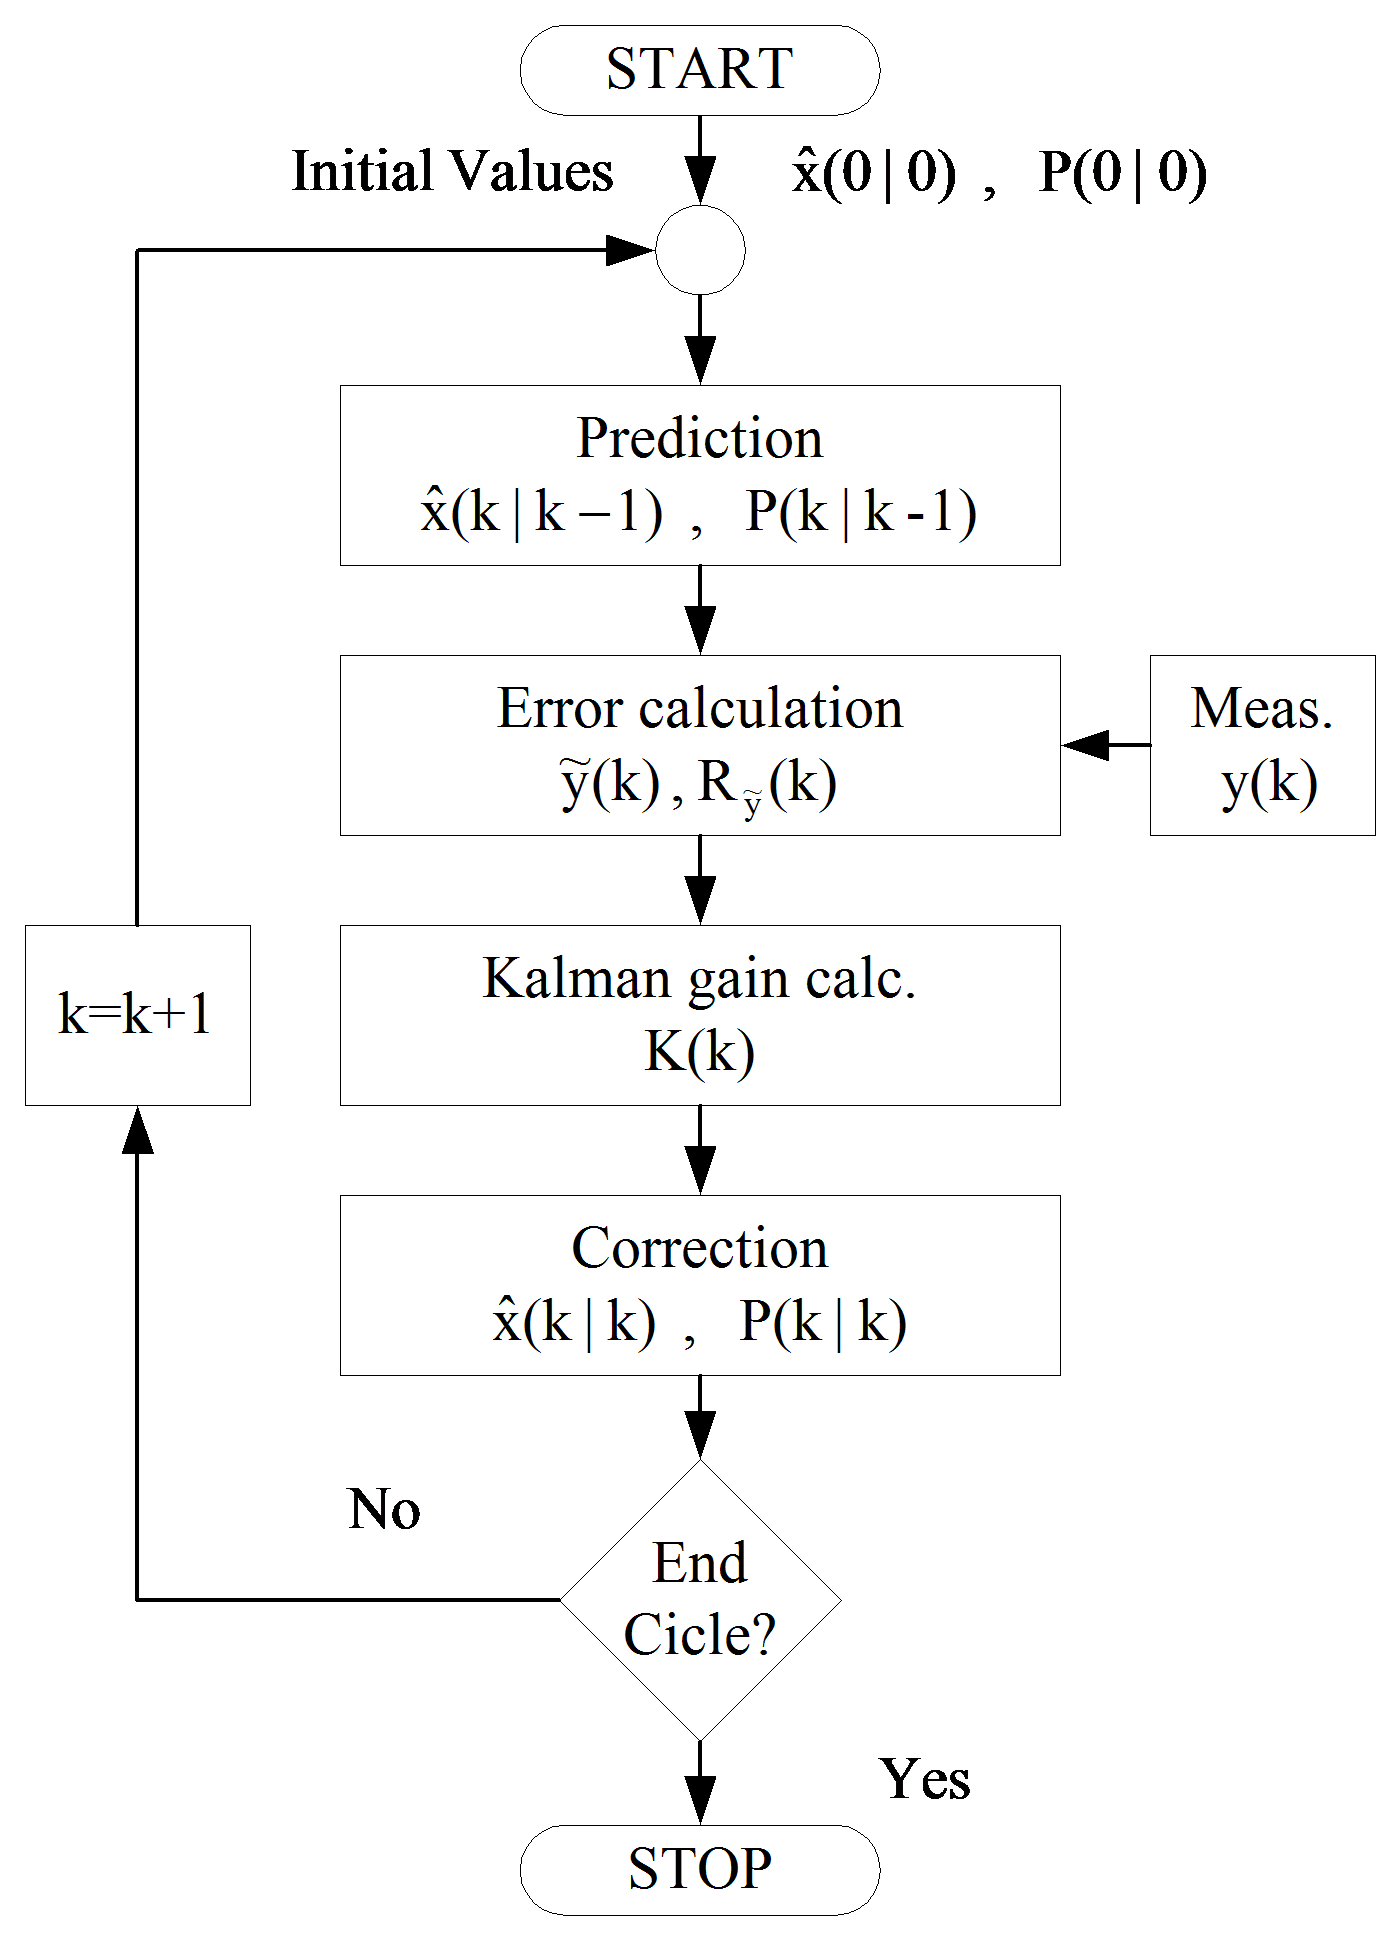 Flow chart of the KF